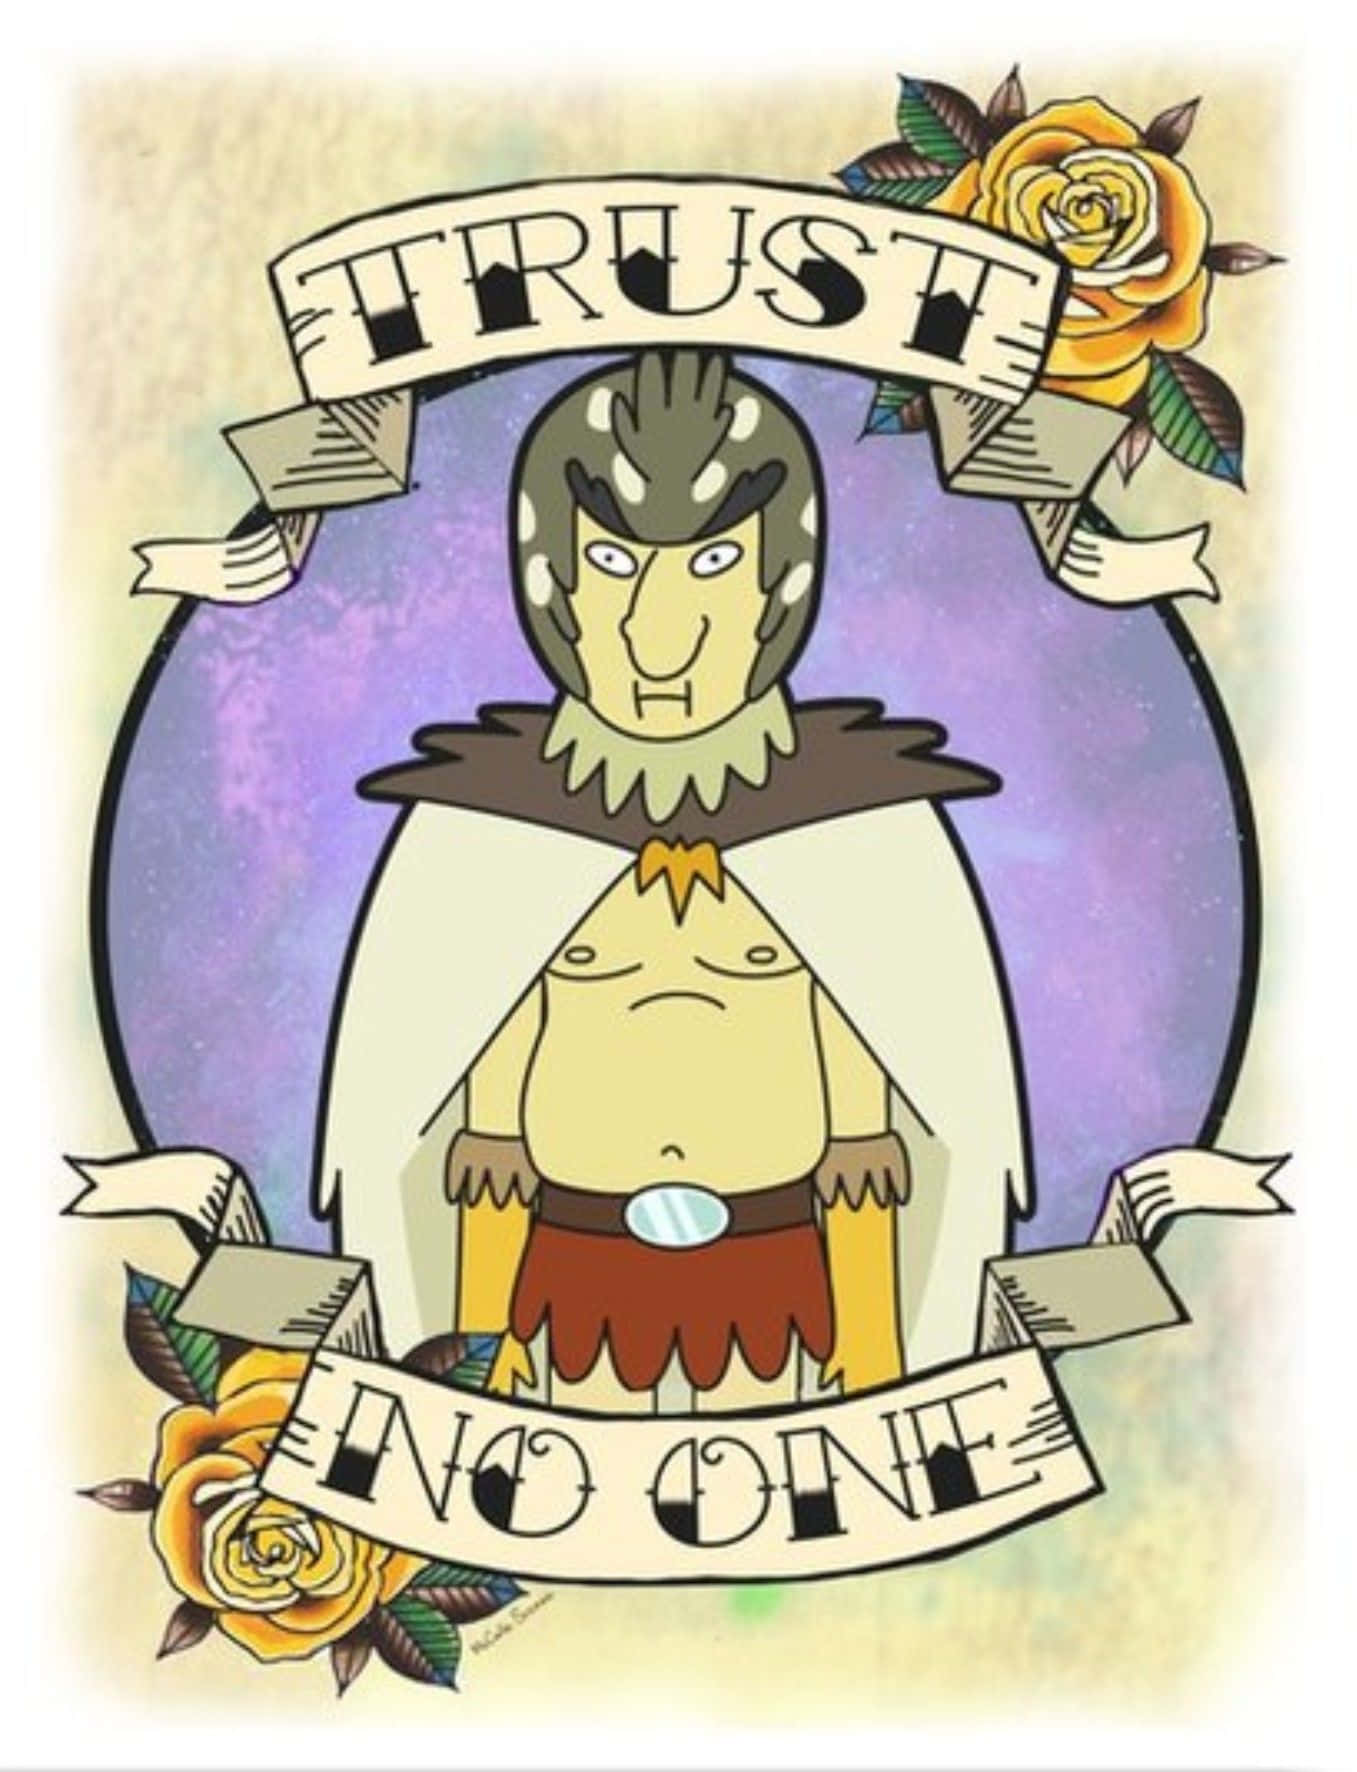 Caption: Birdperson, a wise and noble character from Rick and Morty Wallpaper